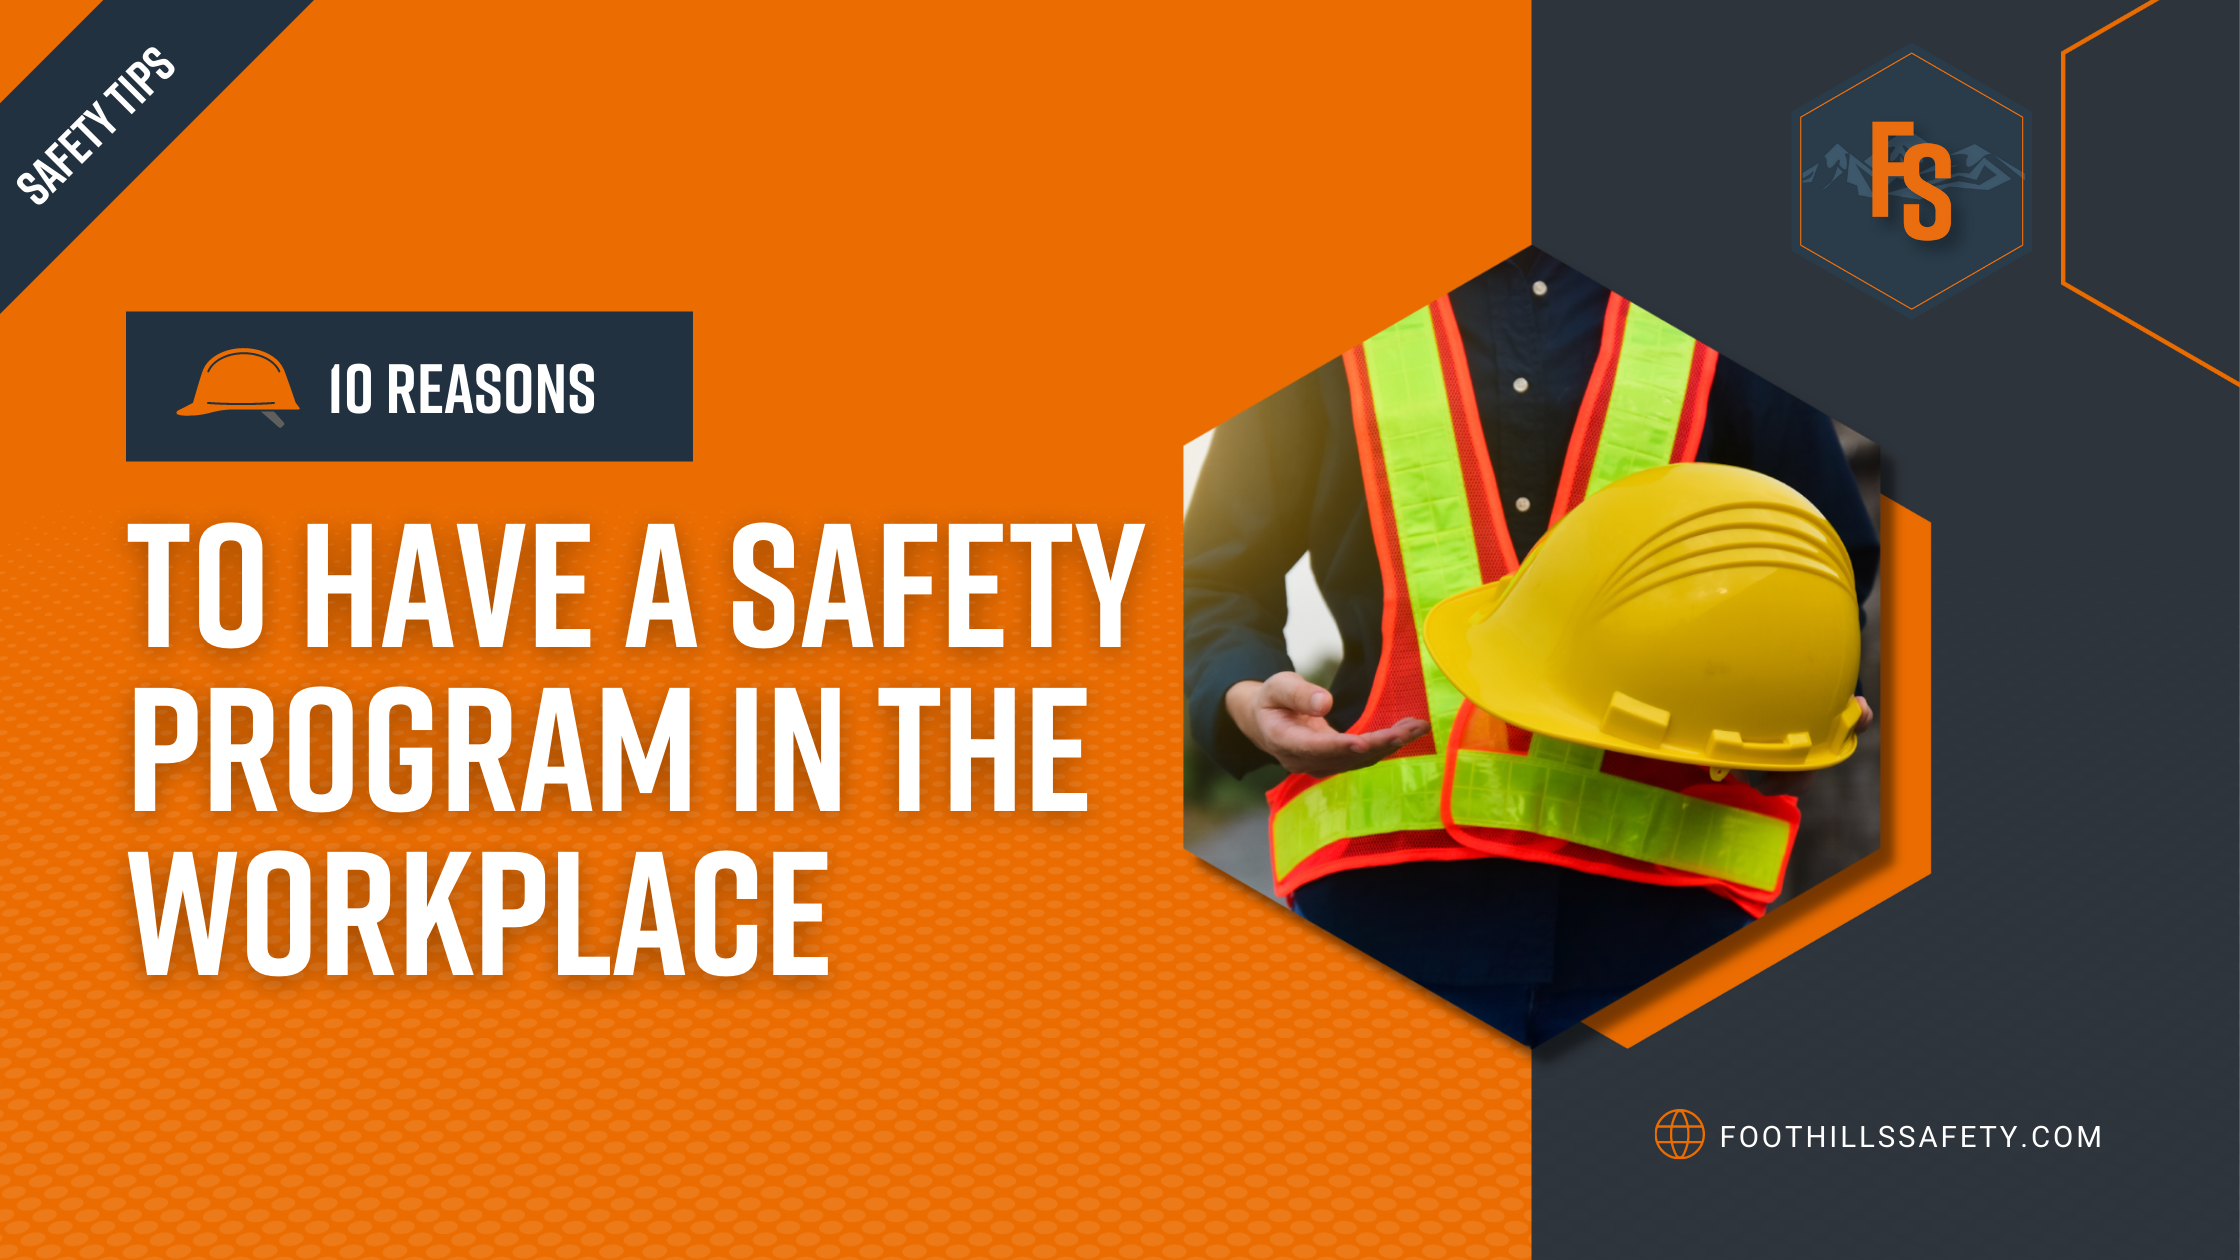 10 Reasons to Have a Safety Program in the Workplace